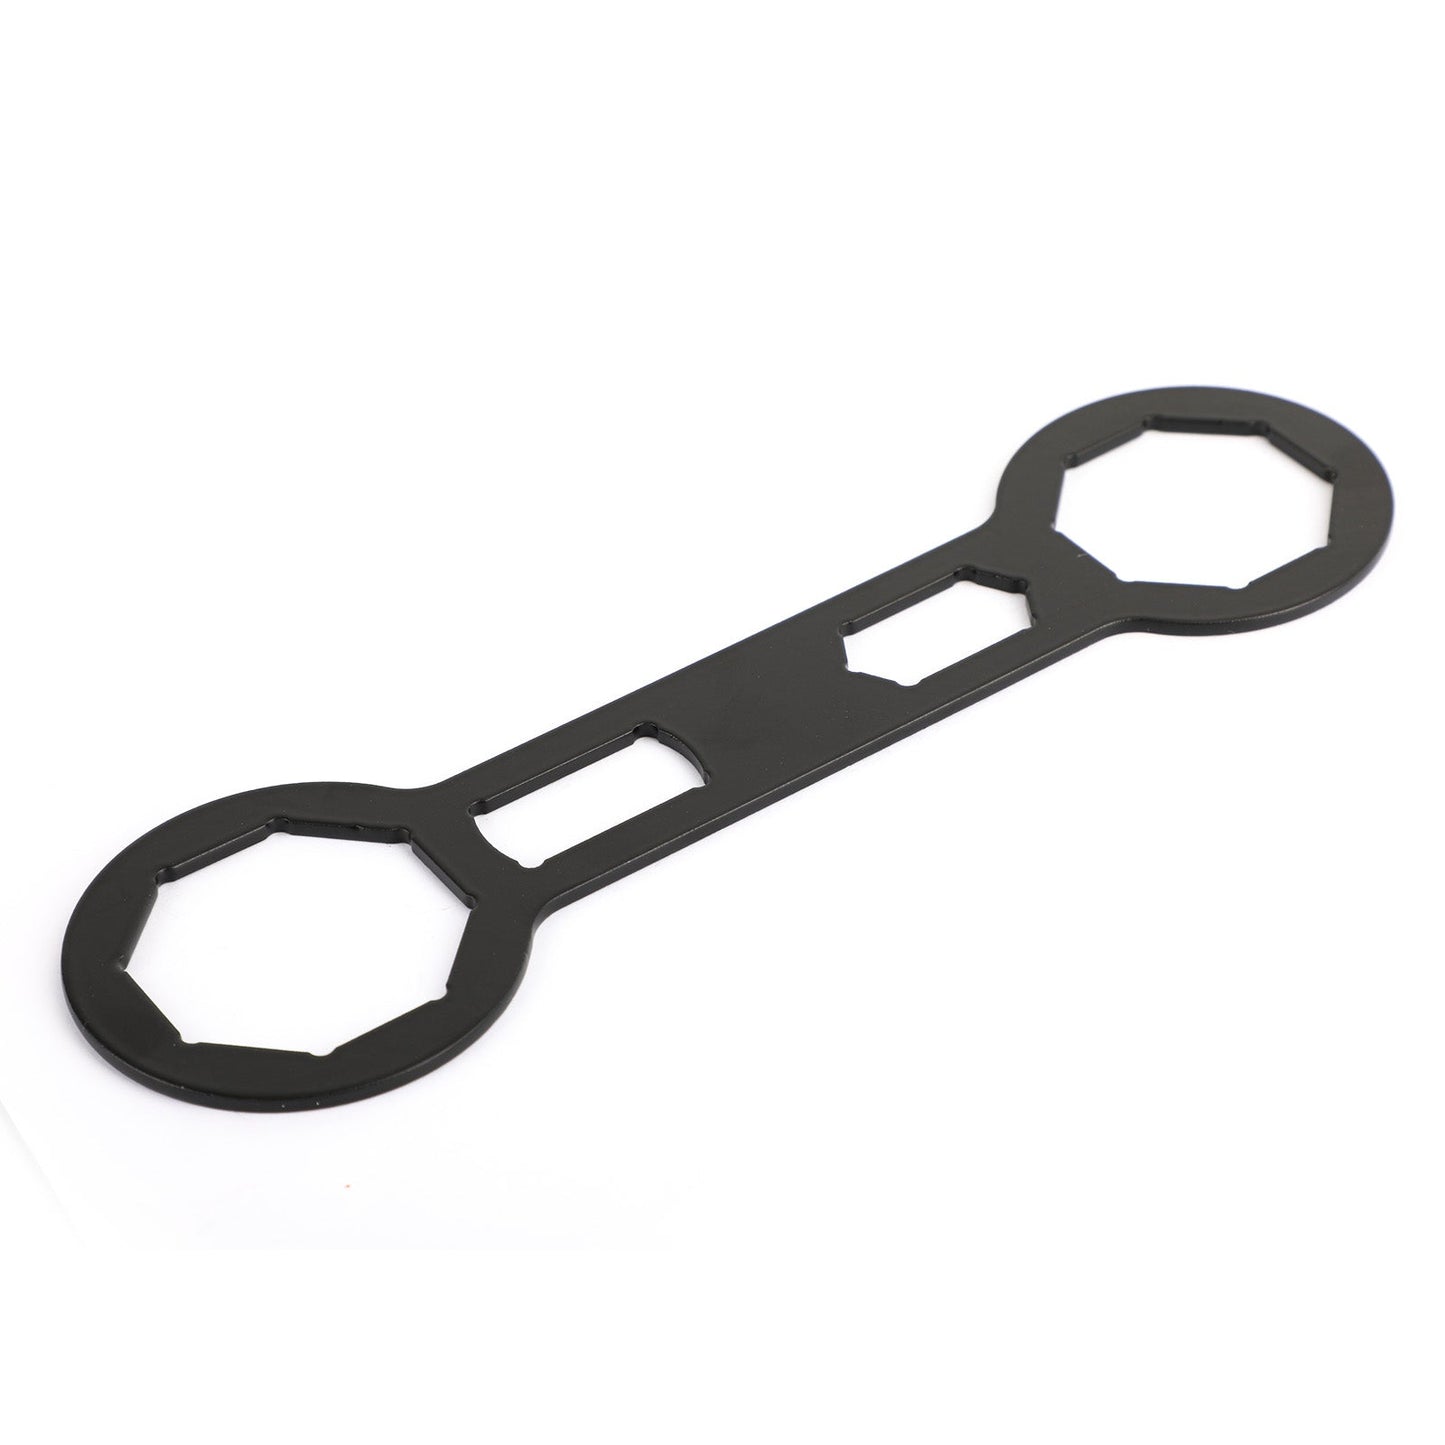 Fork Cap Wrench 46mm 50mm Chamber Fit For Honda CRF250 R/X CRF450 R/X Suzuki RM125